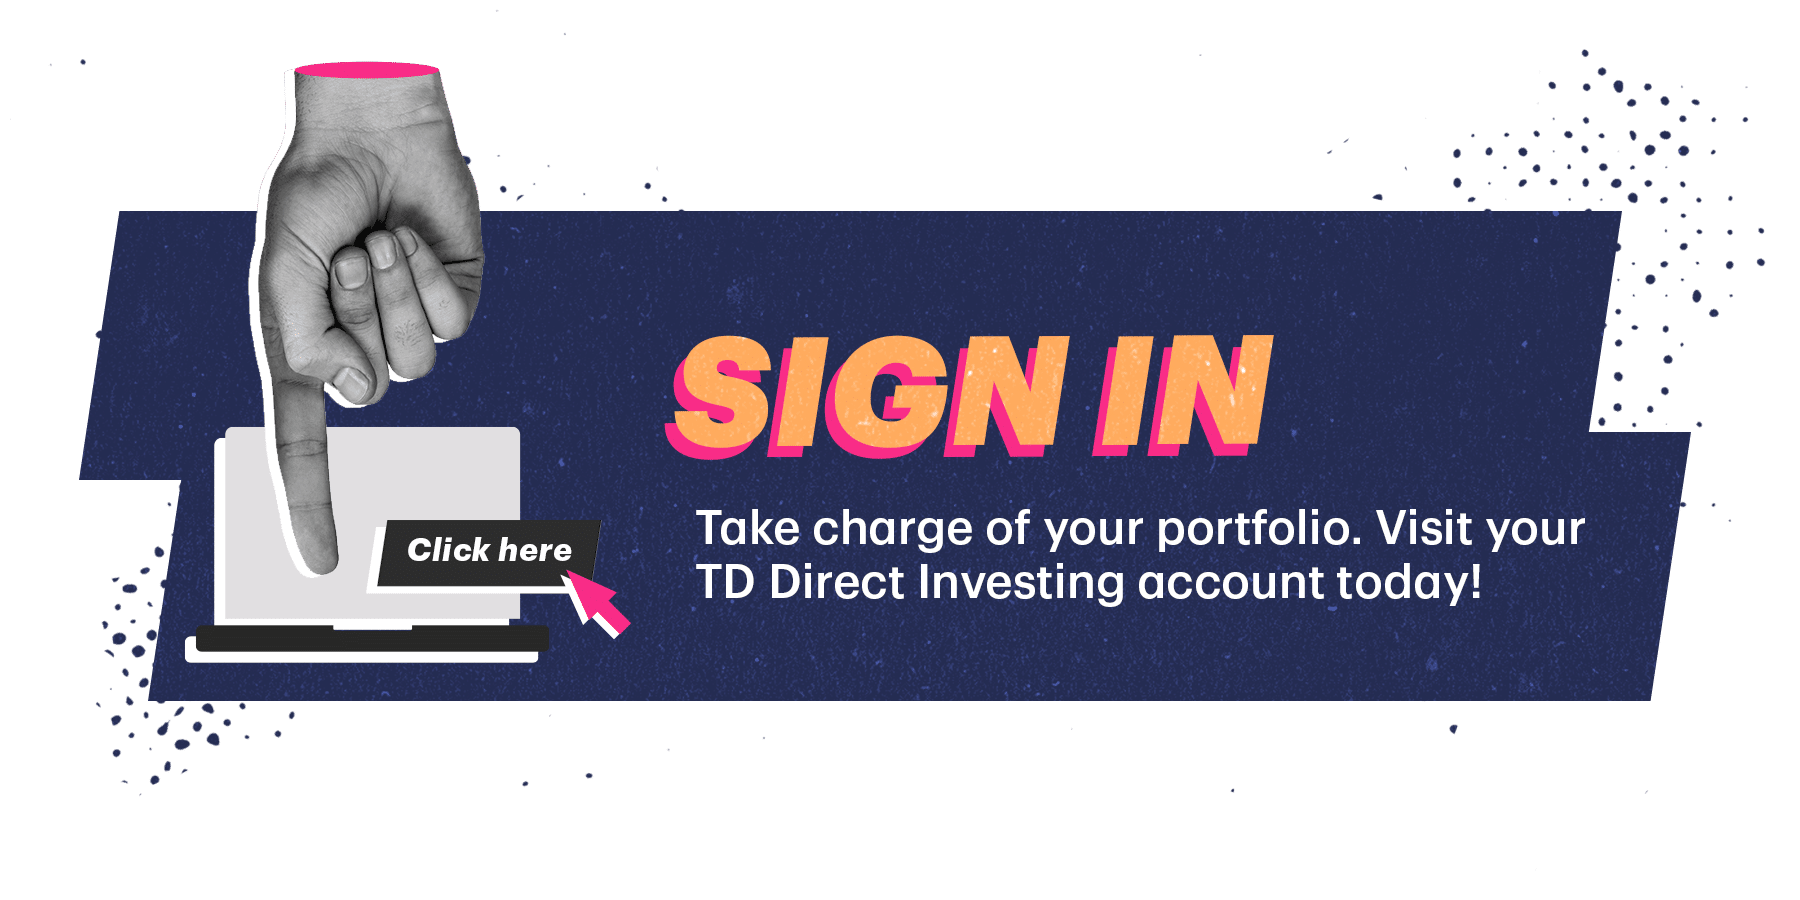 Sign in. Take charge of your portfolio. Visit your TD Direct Investing account today!